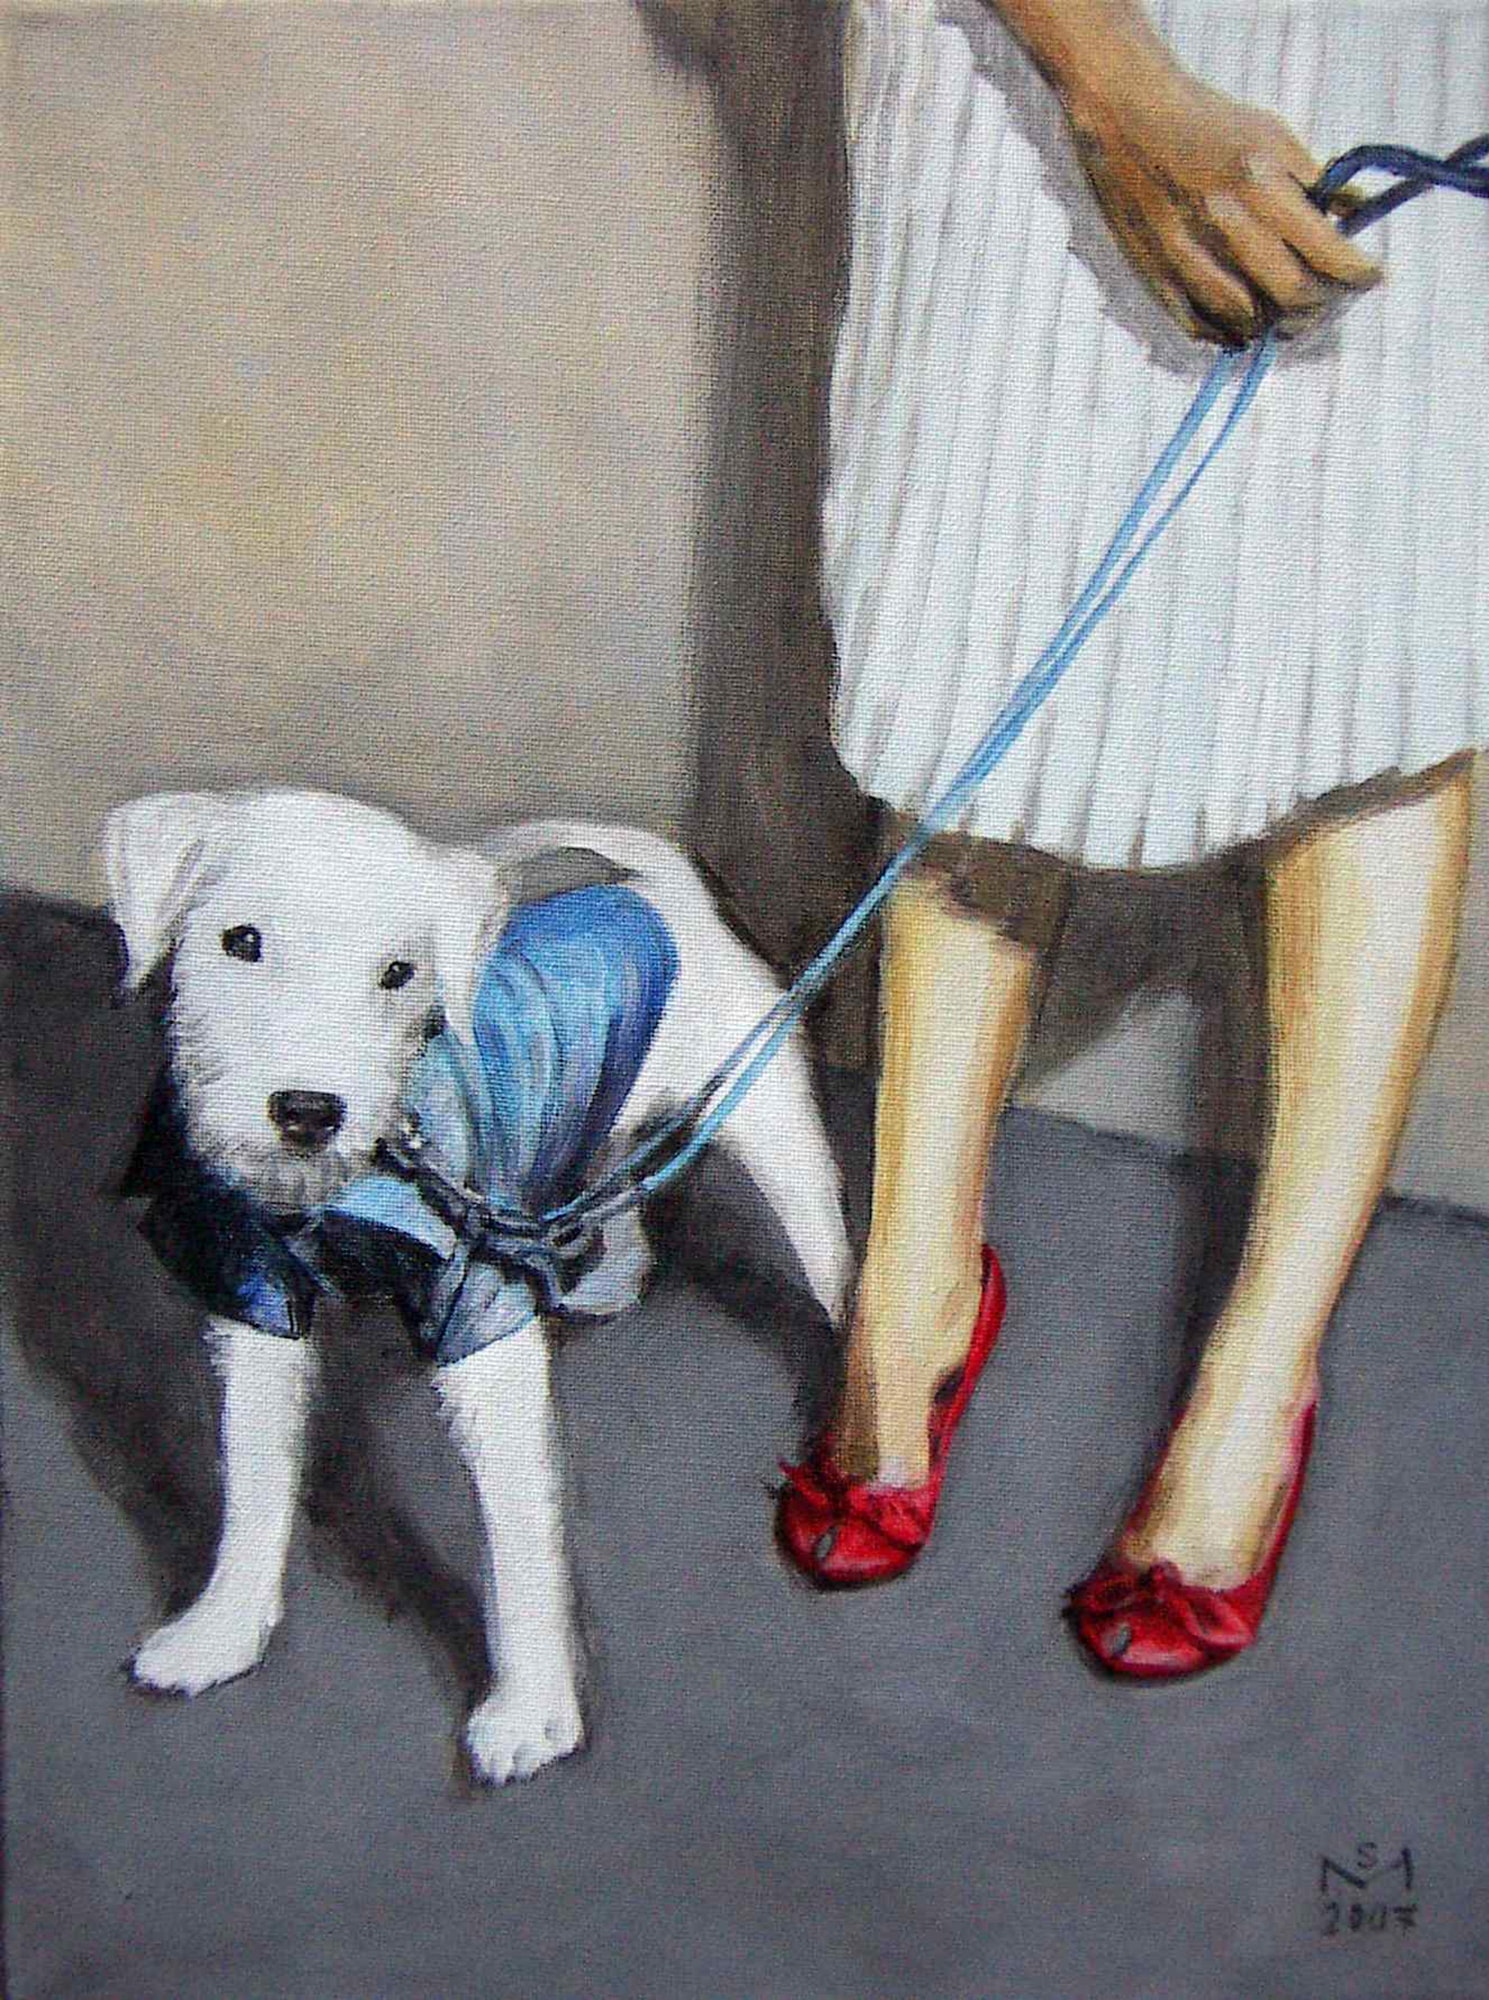 Dog on a leash, lady wearing red shoes | © Sarah Morrissette